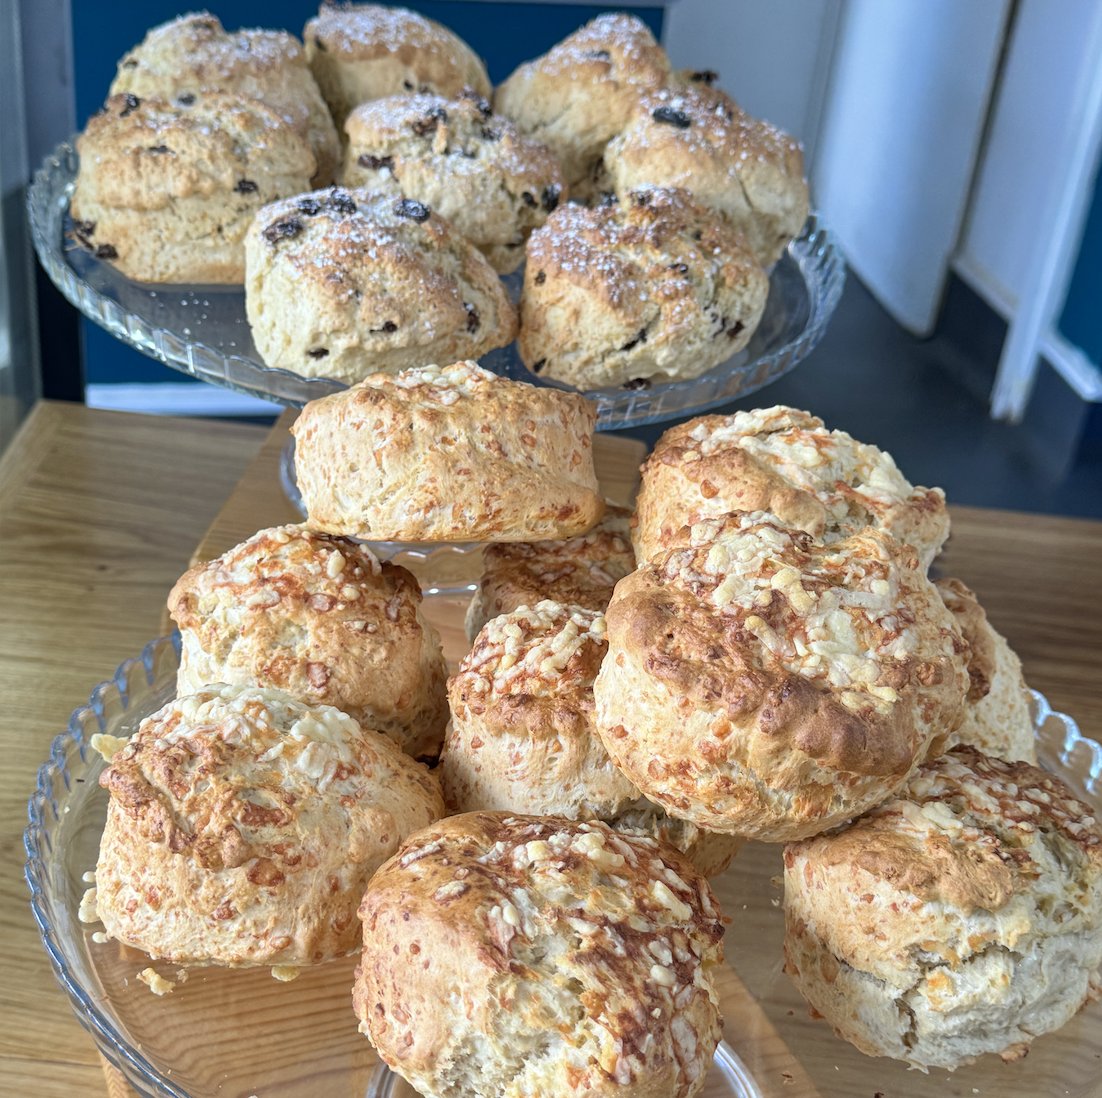 It’s National Tea Day and what better way to celebrate than with a pot of tea and our famous scones in one of our fabulous cafes! Deliciously moreish, the only question is will you choose cheese or fruit?